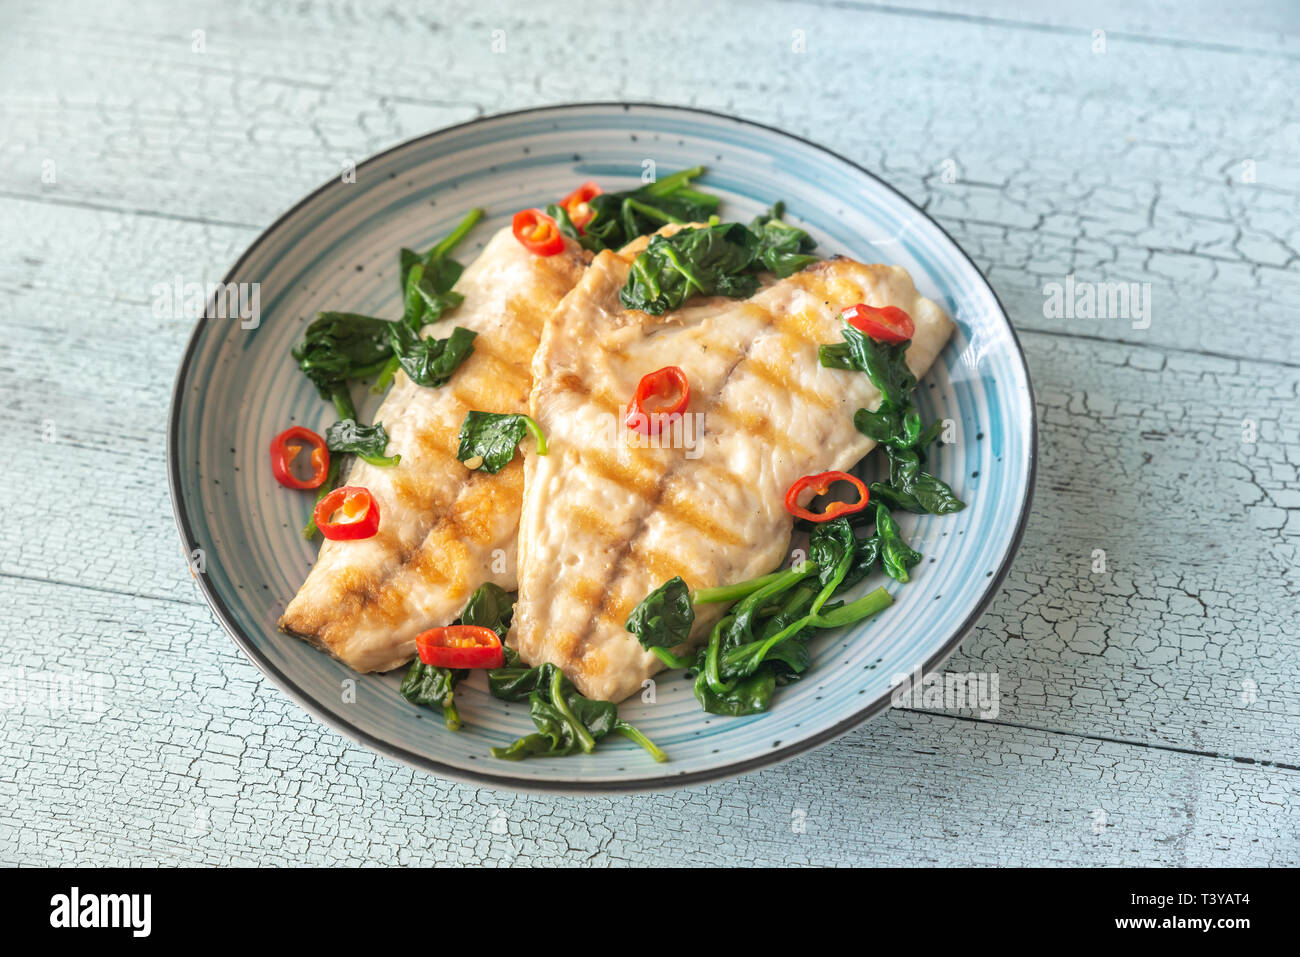 Grilled sea bream fish fillet with spinach and chili pepper Stock Photo